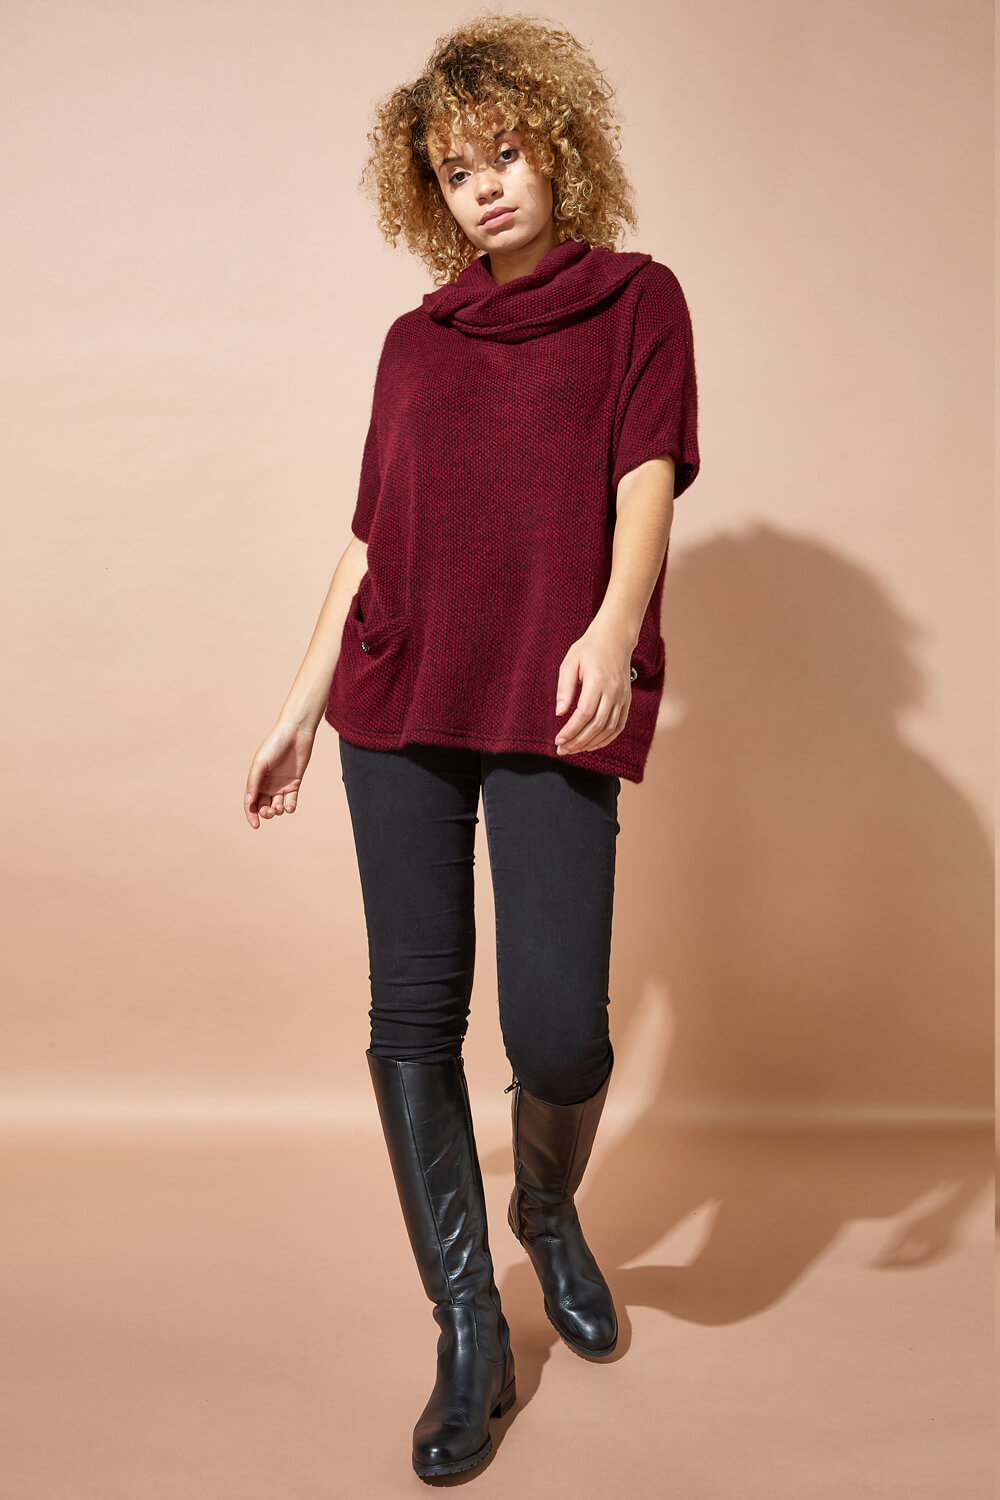 Wine Cowl Neck Textured Tunic Top, Image 5 of 5